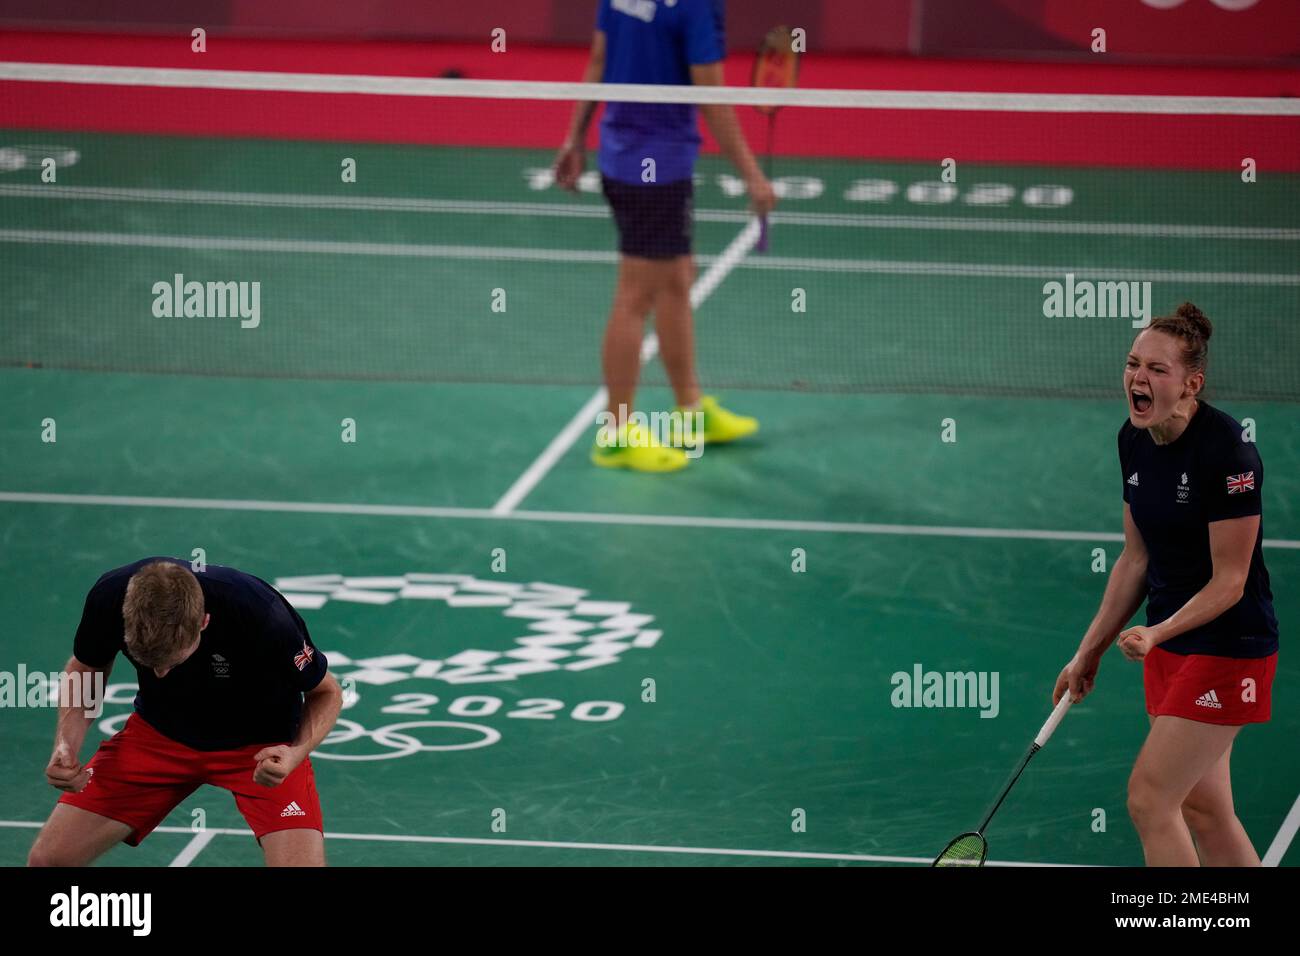 Britain's Marcus Ellis and Lauren Smith play celebrate their victory over  Thailand's Dechapol Puavaranukroh and Sapsiree Taerattanachai during their  mixed doubles group play stage badminton match at the 2020 Summer Olympics,  Monday,